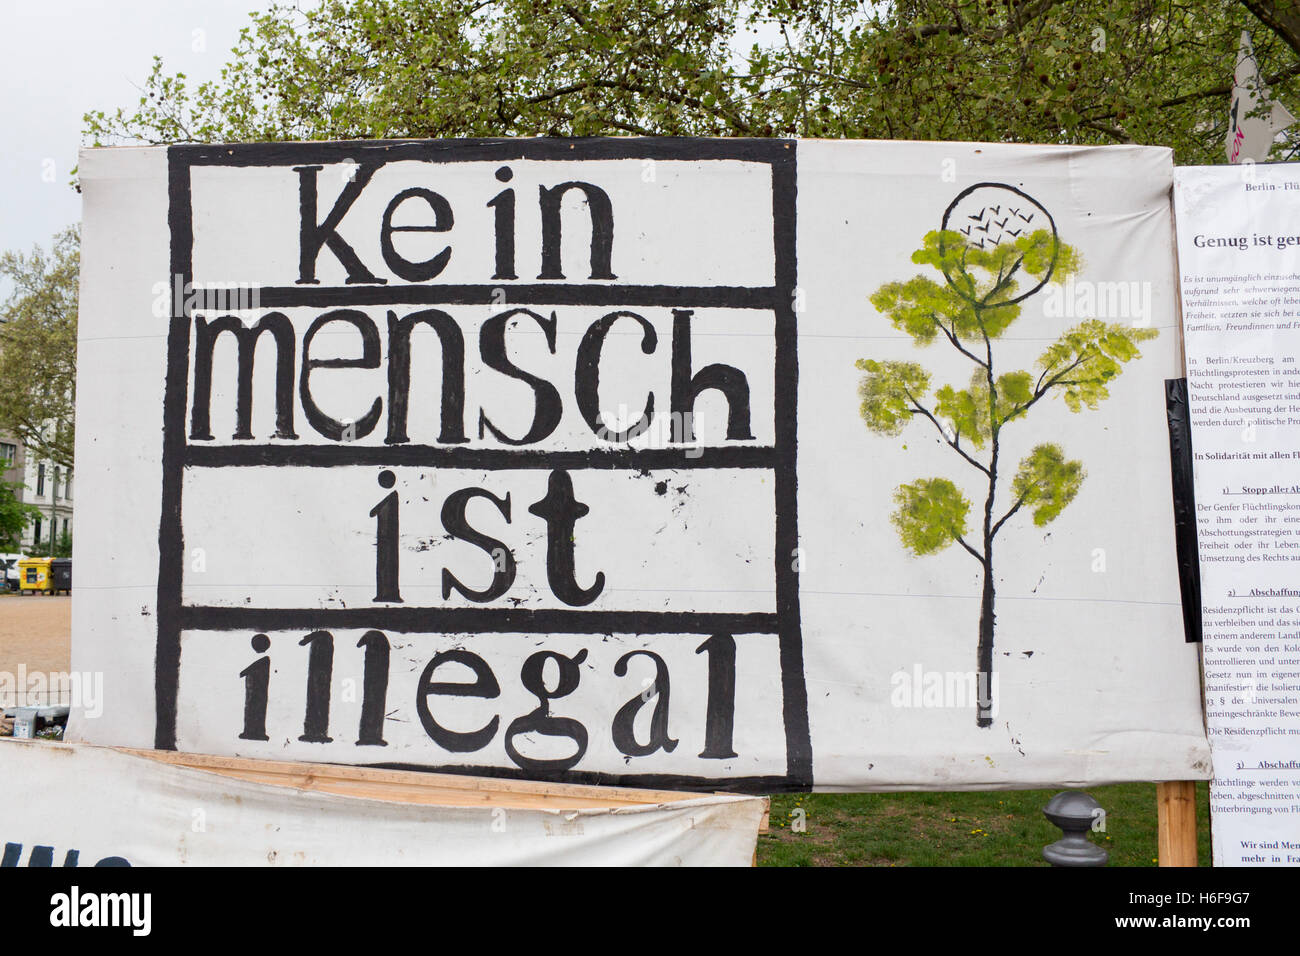 Kein Mensch ist illegal No One is illegal banner at protest Kreuzberg Berlin Germany Stock Photo